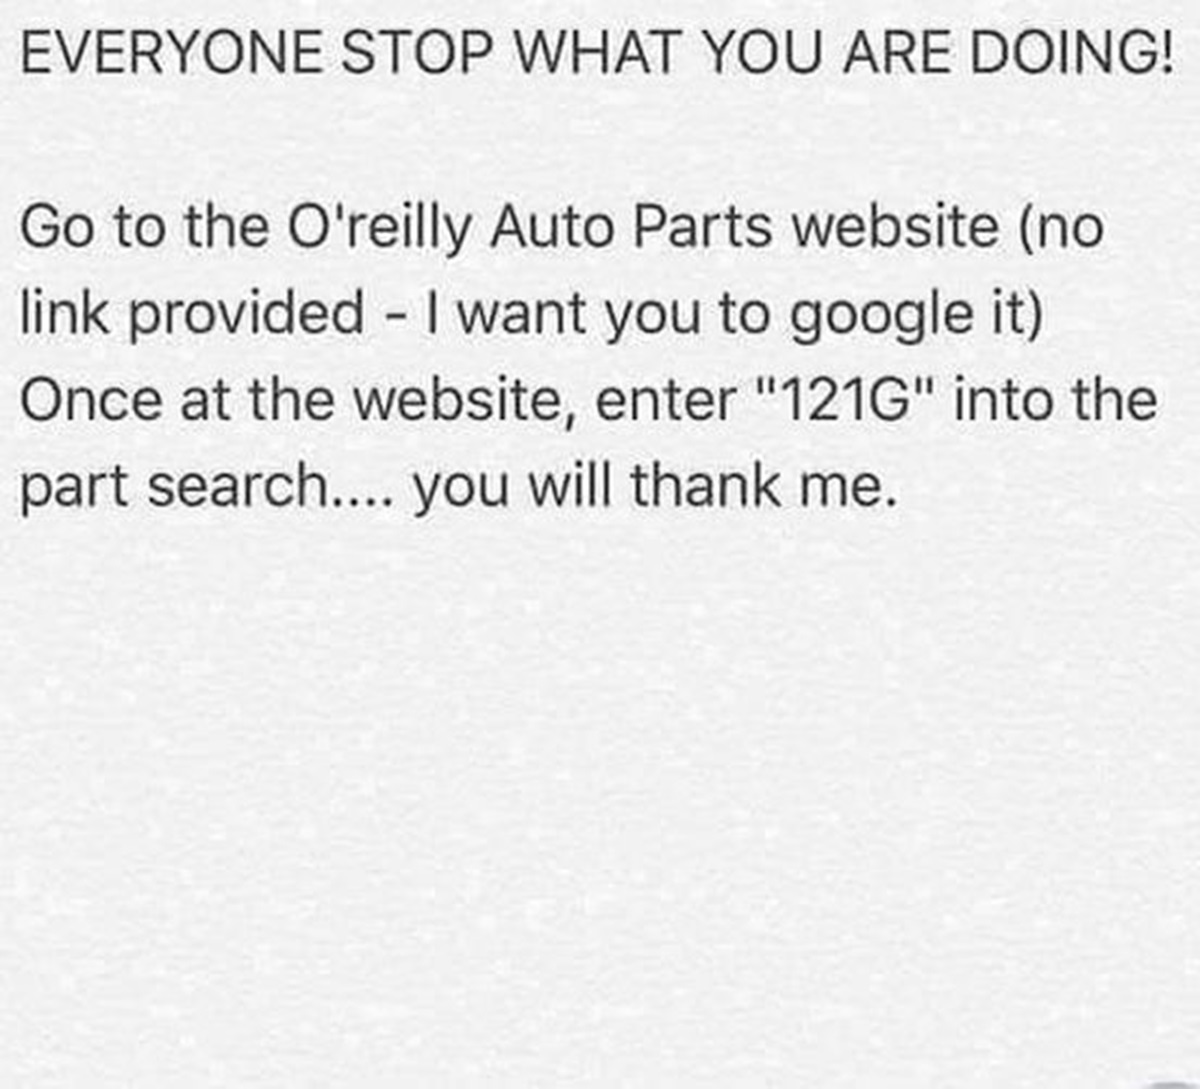 parallel - Everyone Stop What You Are Doing! Go to the O'reilly Auto Parts website no link provided I want you to google it Once at the website, enter "121G" into the part search.... you will thank me.